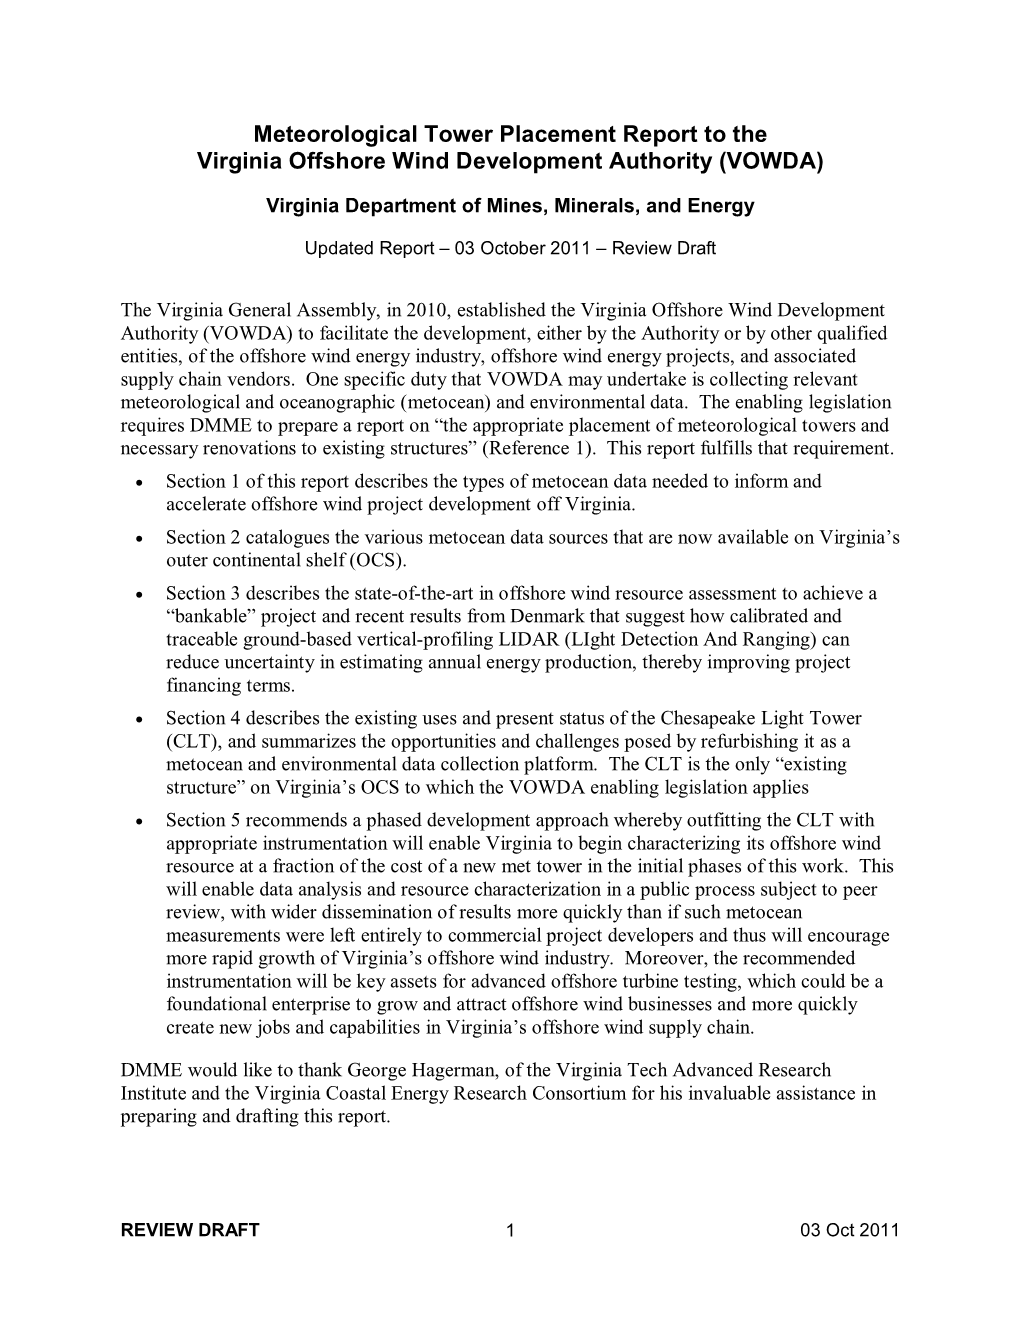 Meteorological Tower Placement Report to the Virginia Offshore Wind Development Authority (VOWDA)